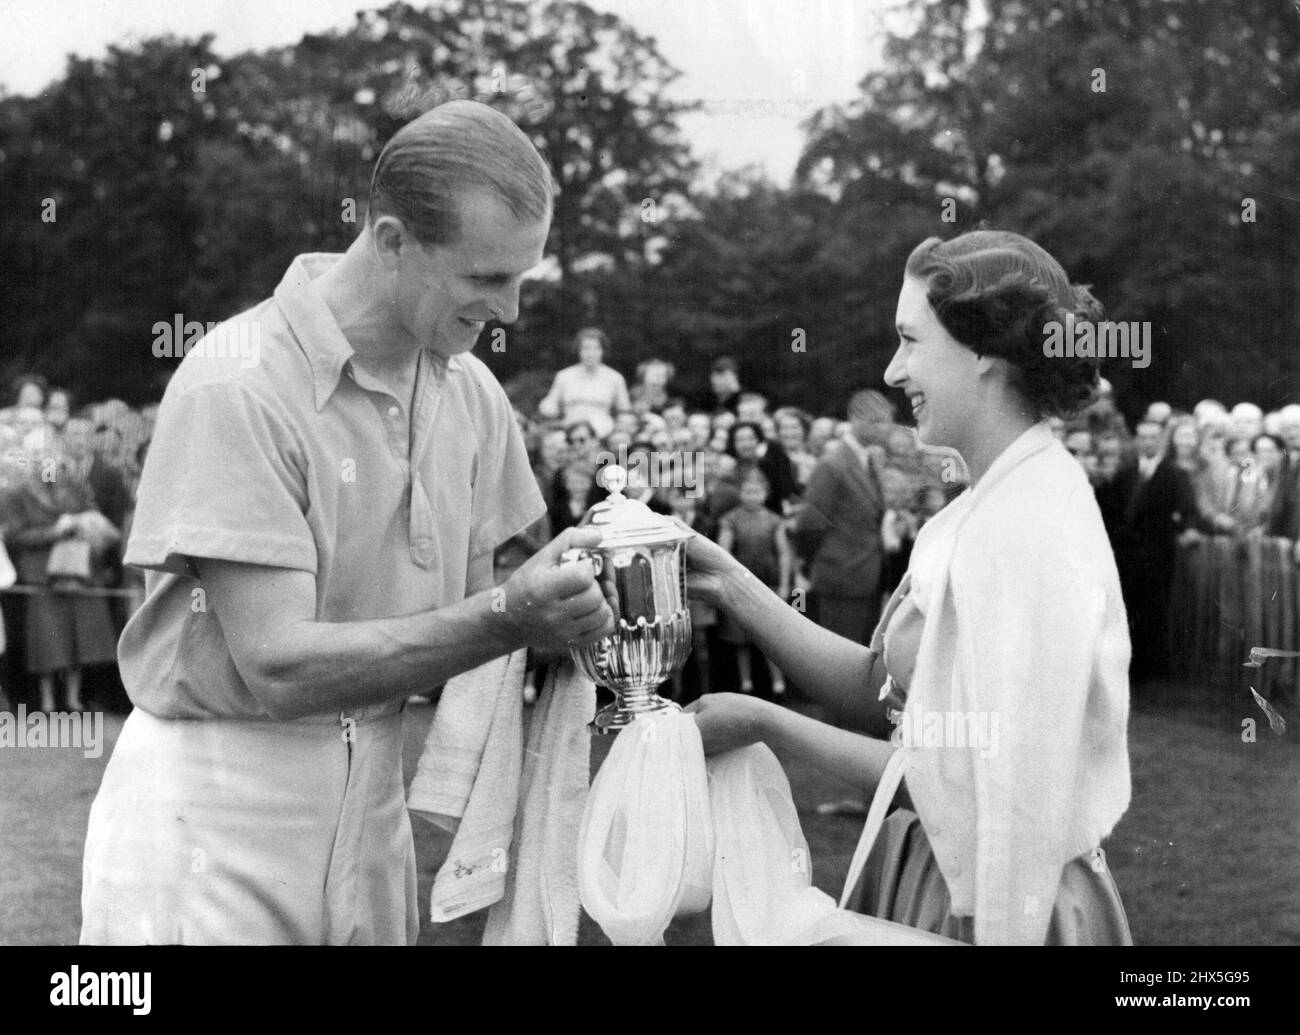 From The Princess To The Duke -- Princess Margaret, in turquoise blue dress and white cardigan, smiles as she present the Duke of Sutherland cup to the Duke of Edinburgh after the Cowdray park team had beaten the greyhounds in the final at the polo tournament at Cowdray park Midhurst Sussex, to-day. (Whit-Monday). The Princess had driven down with the Duke from Windsor. June 07, 1954. (Photo by Reuterphoto). Stock Photo